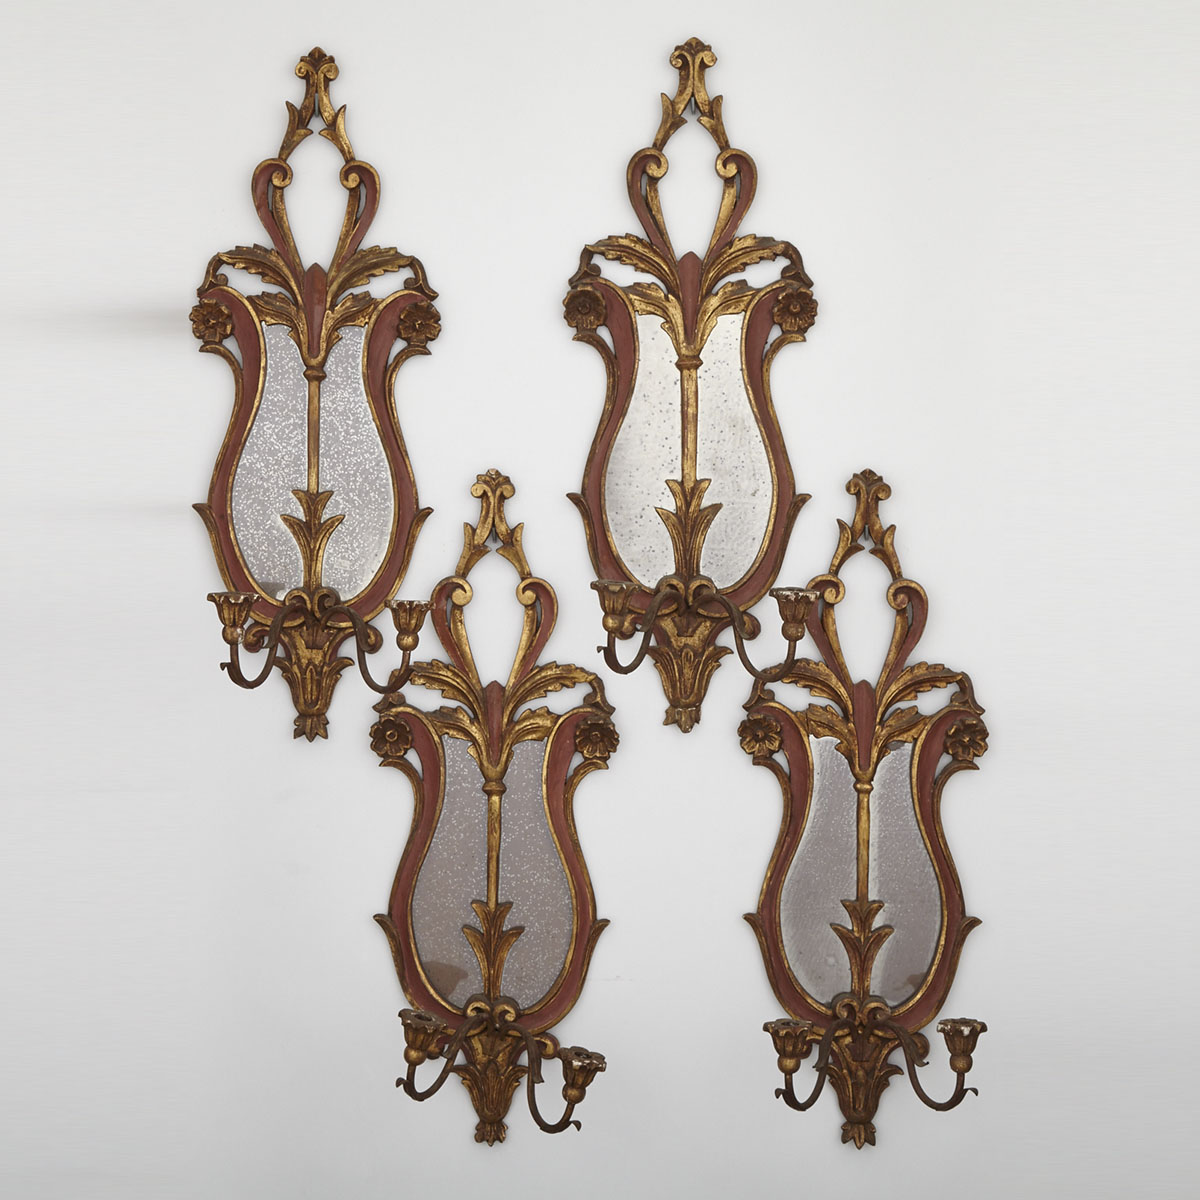 Set of Four Parcel Painted Giltwood Mirror Back Wall Sconces, mid 20th century